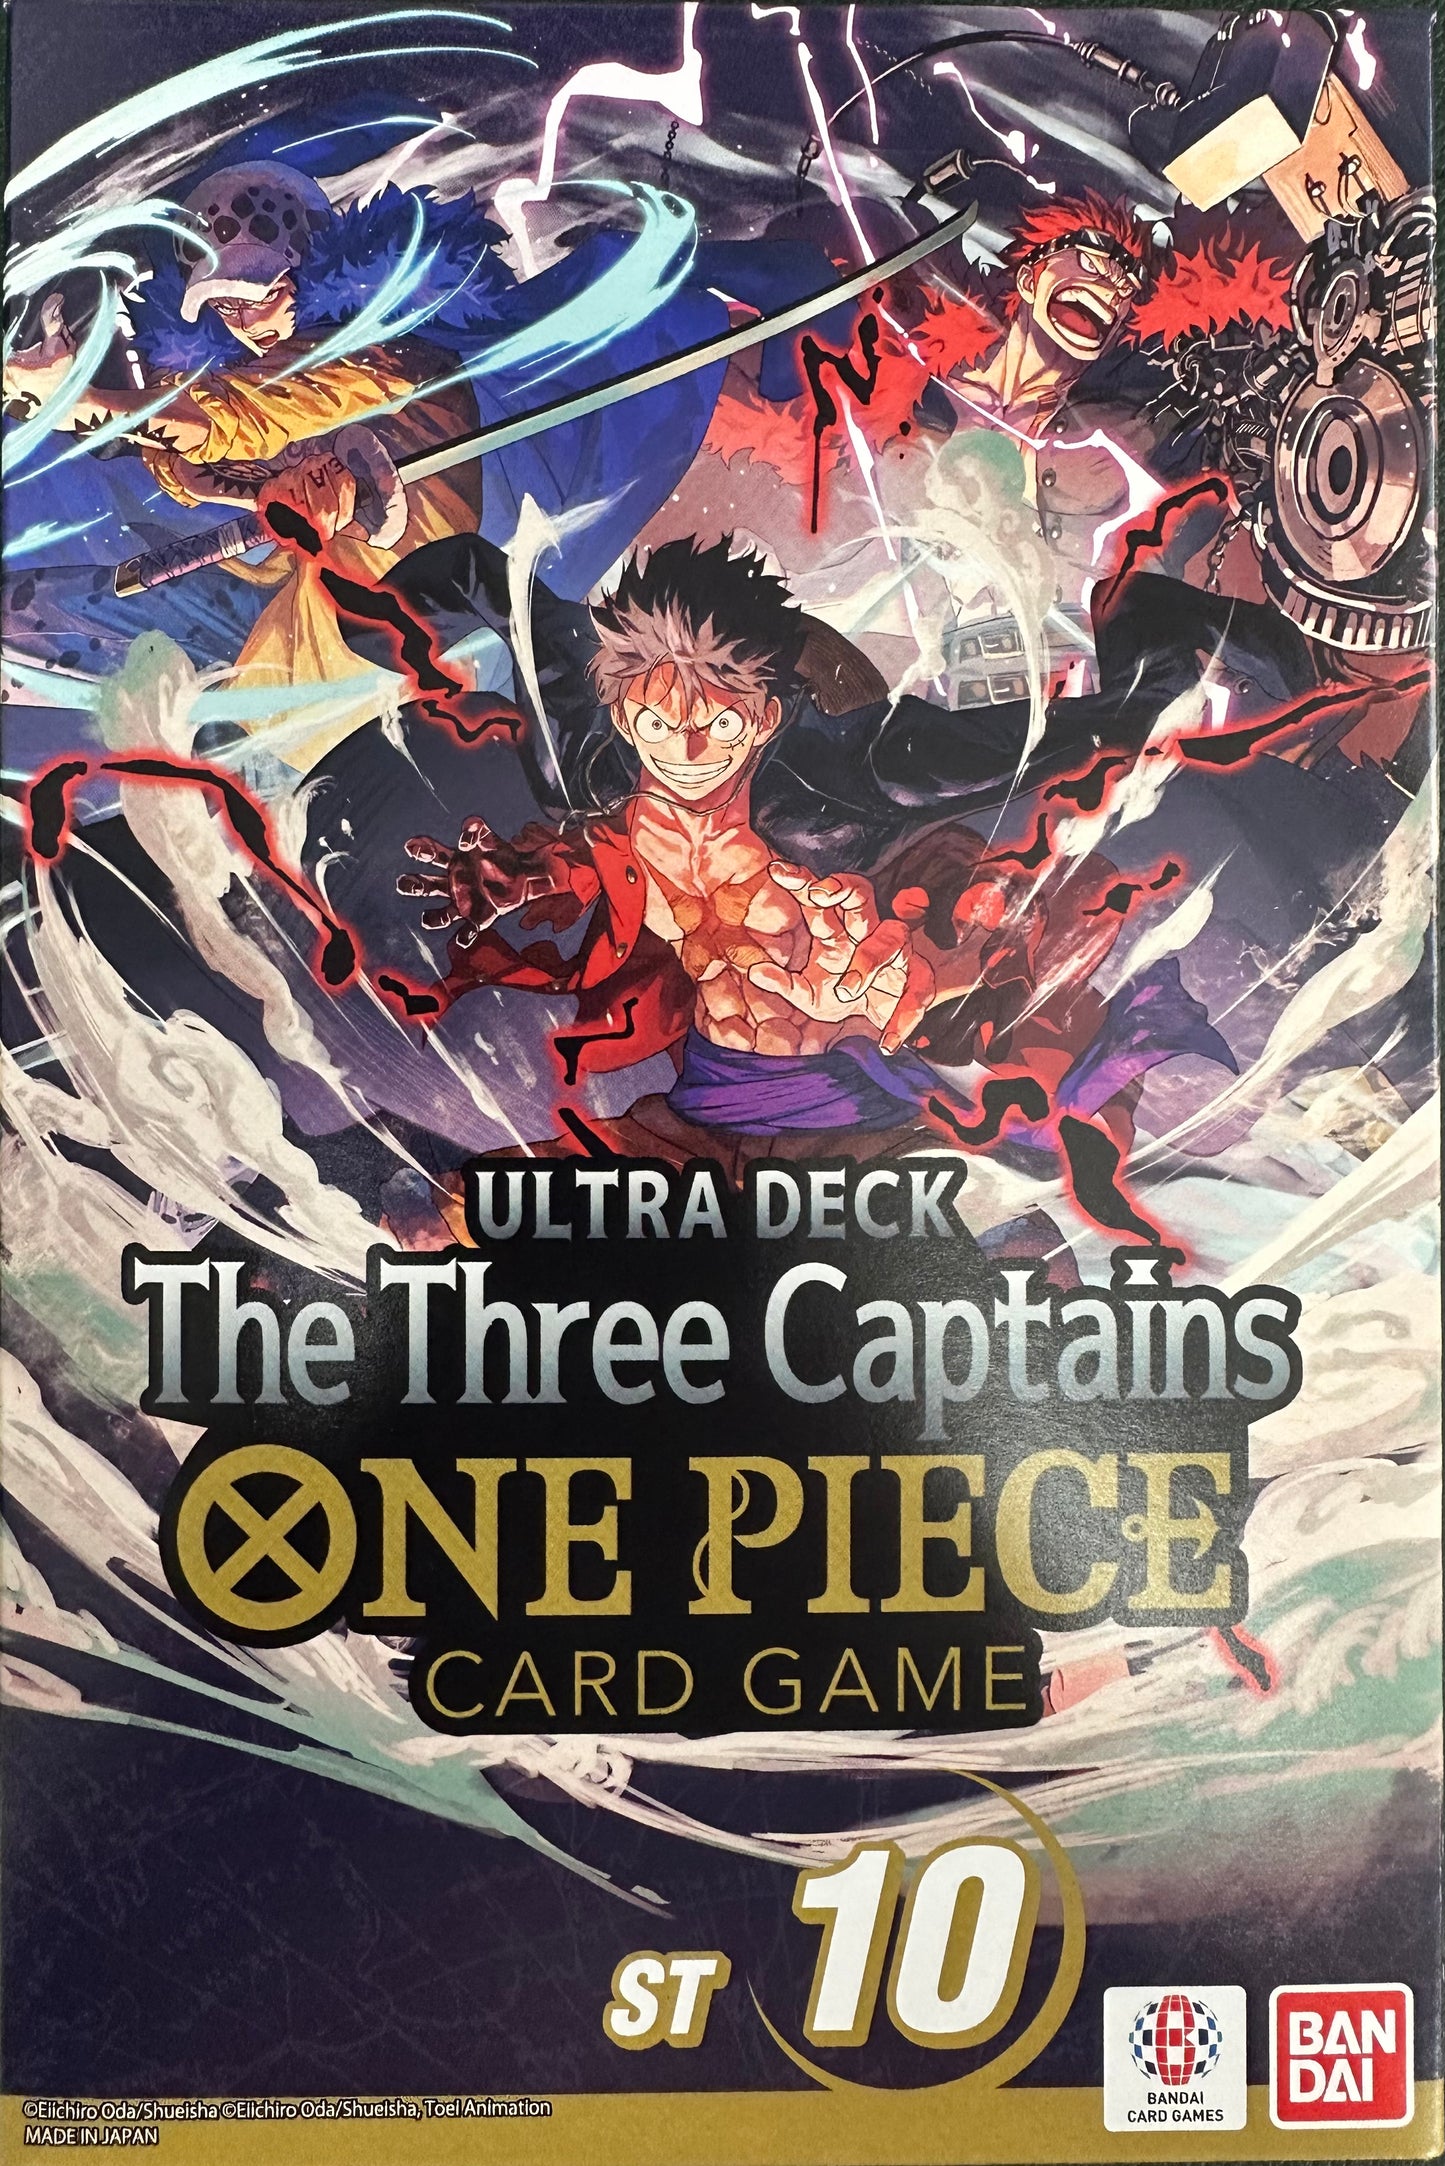 One Piece Ultra Deck: The Three Captains